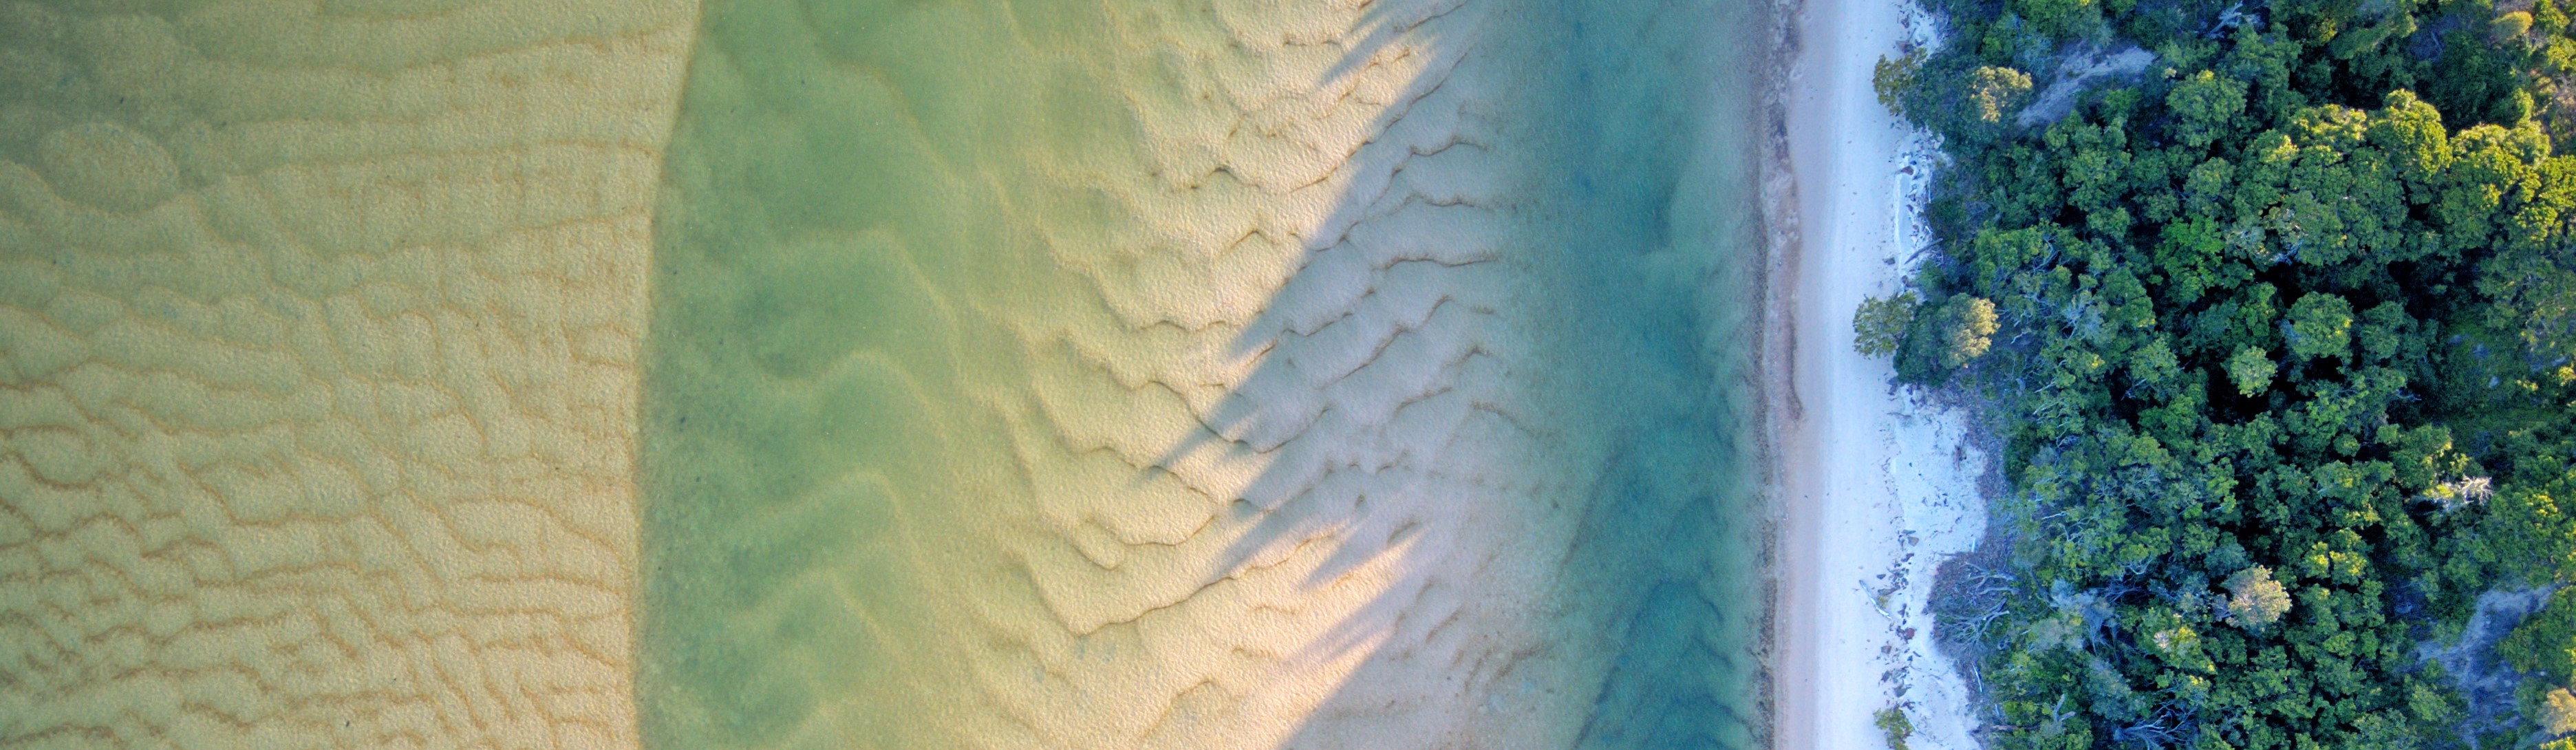 Vertical drone photograph of undulating sand within a river channel and a tree lined river-bank casting shadows